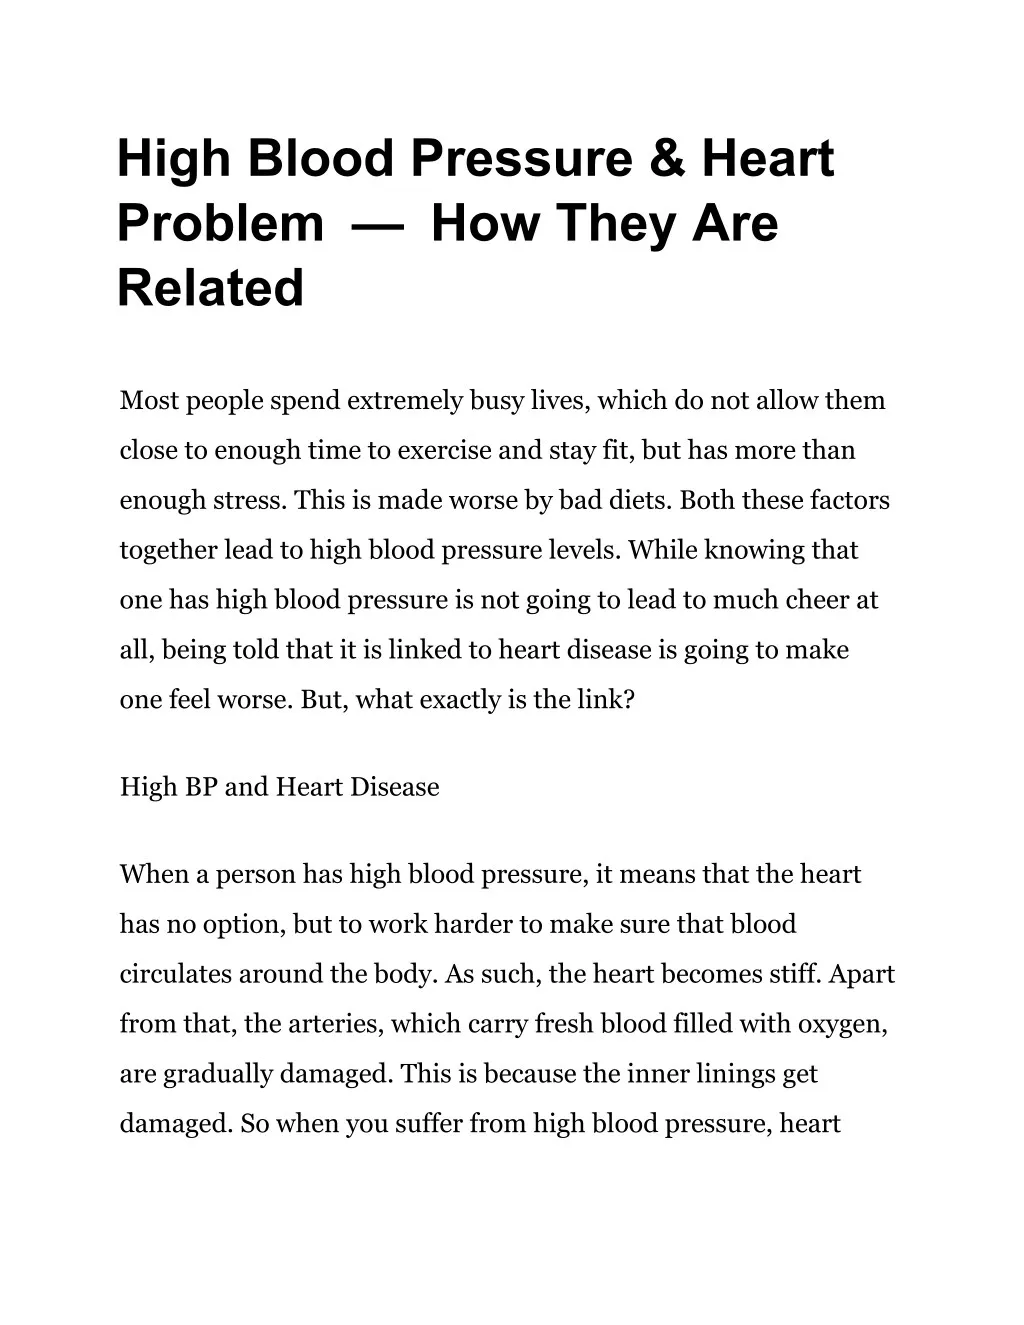 high blood pressure heart problem how they